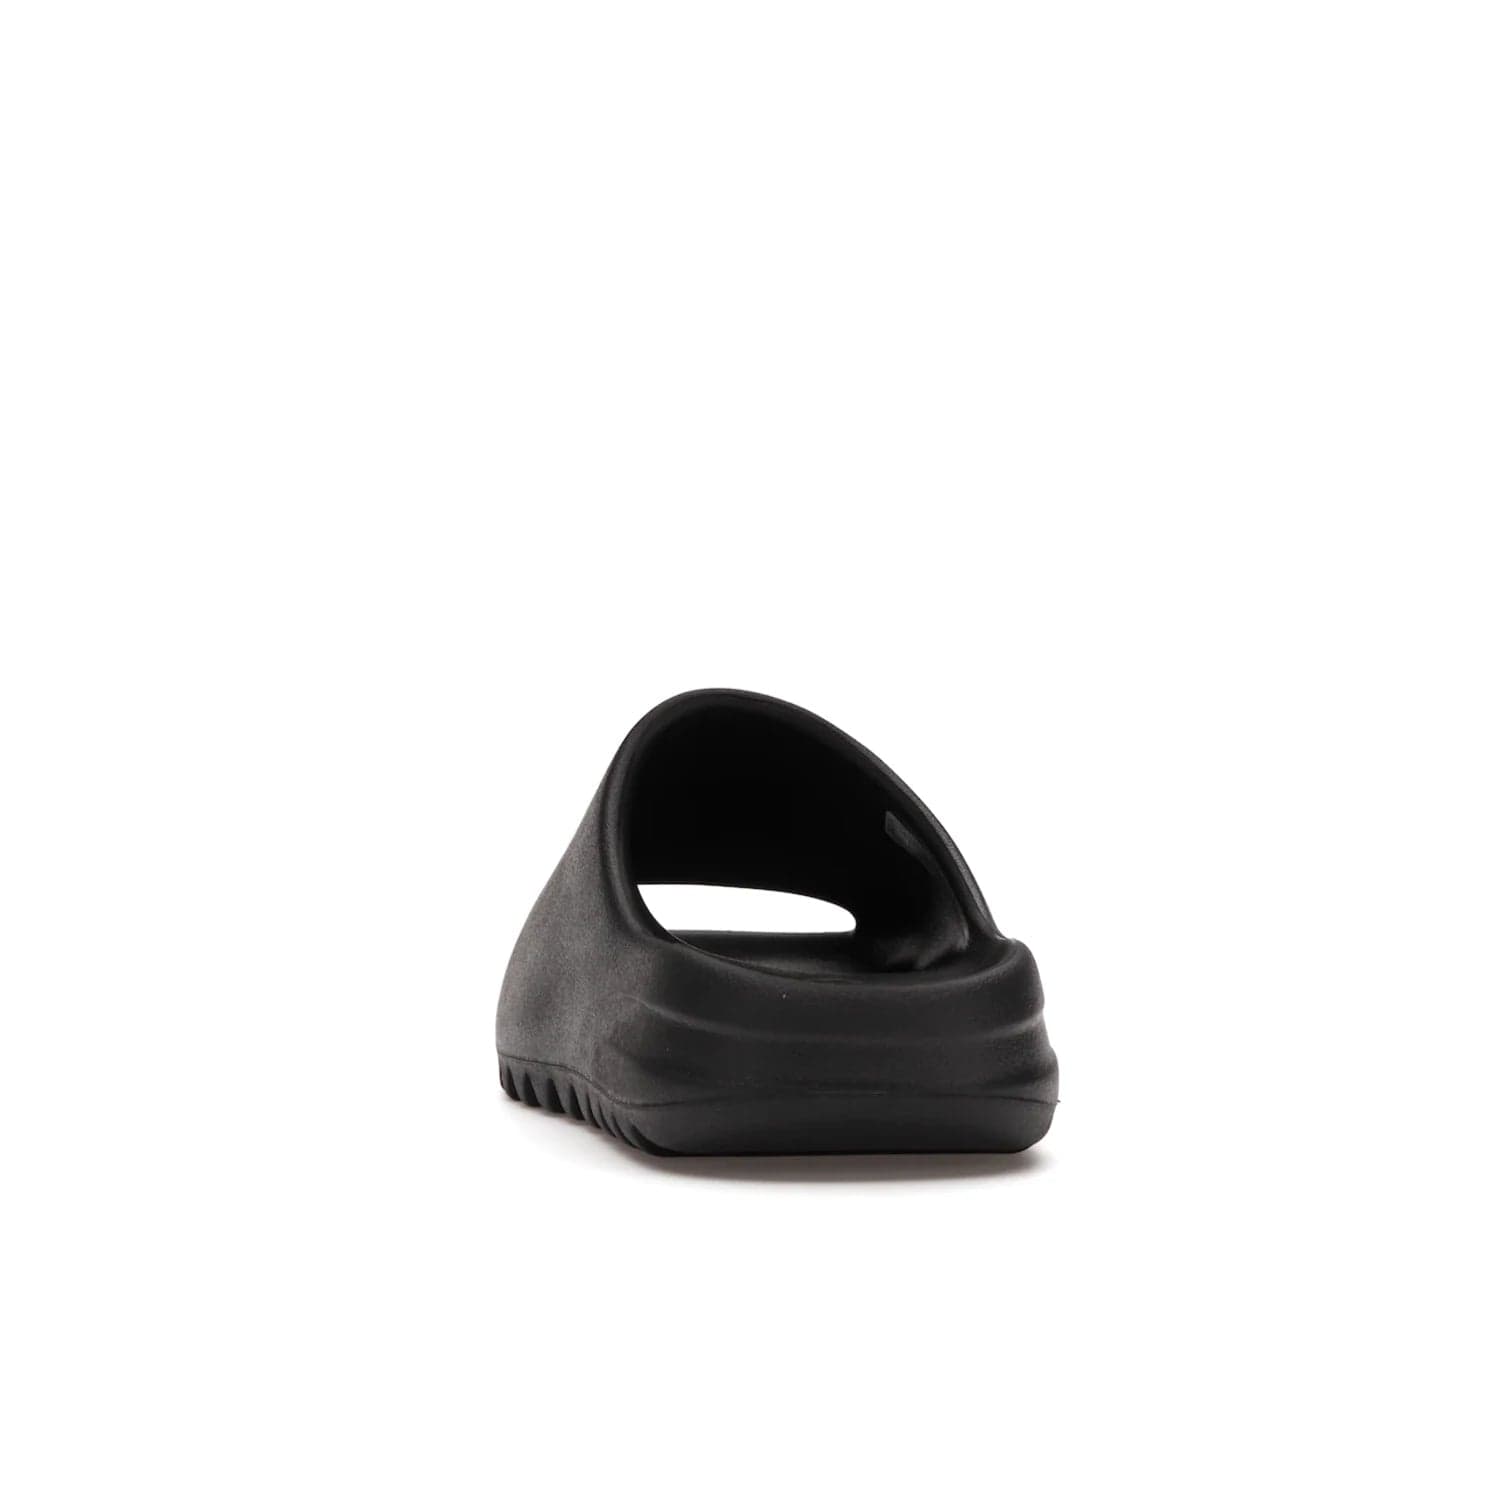 adidas Yeezy Slide Onyx - Image 27 - Only at www.BallersClubKickz.com - Step into comfort and style with the adidas Yeezy Slide Onyx. Featuring foam construction, an all-black colorway and a grooved outsole for stability and responsiveness, this versatile slide is a must-have for your collection.